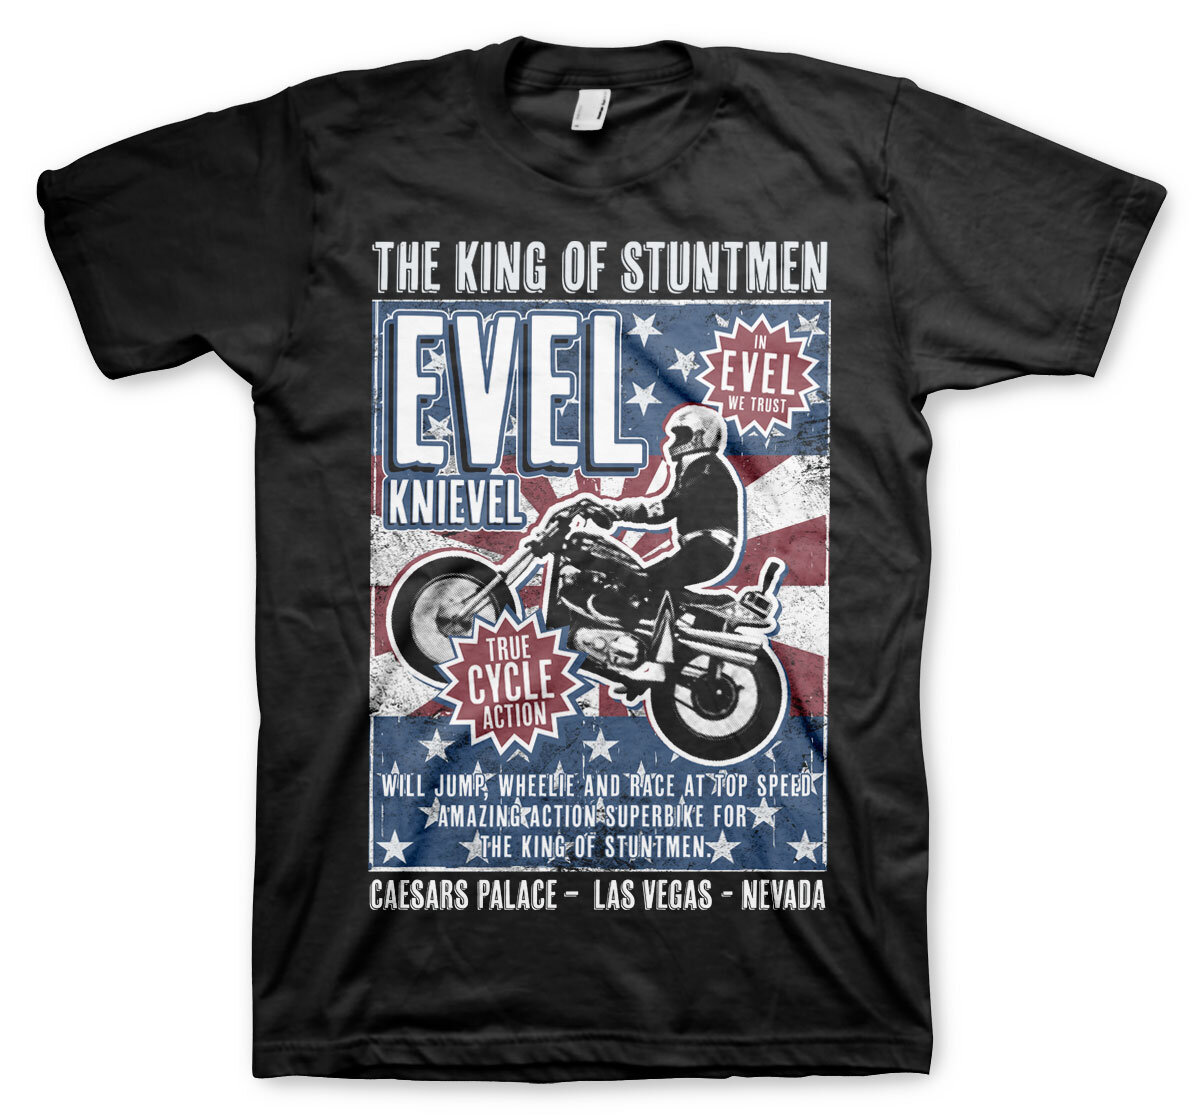 Evel Knievel Poster T-Shirt